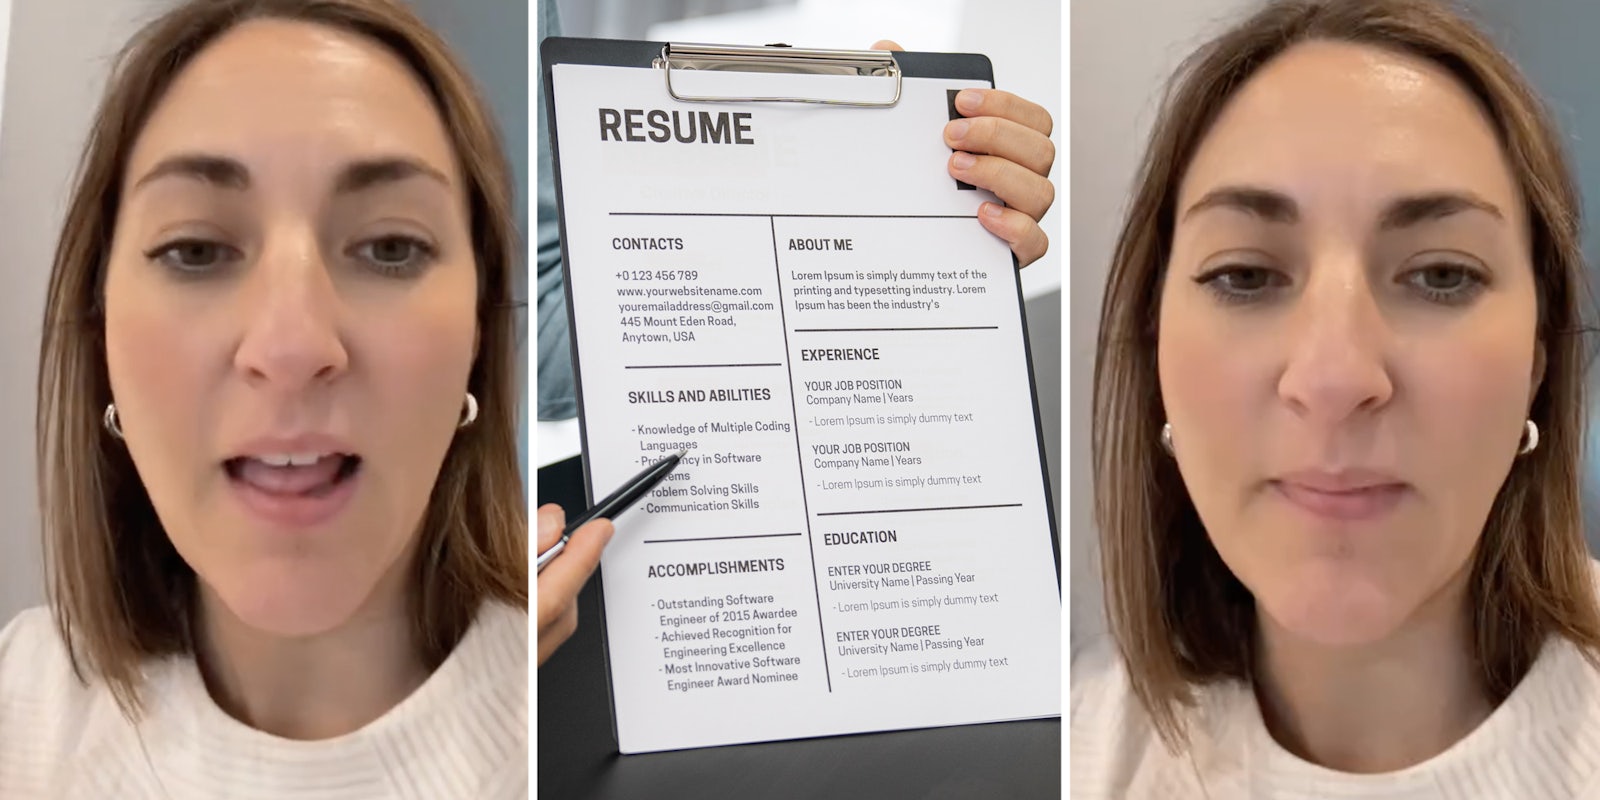 Woman talking(l+r), Hand with pen pointing at resume(c)